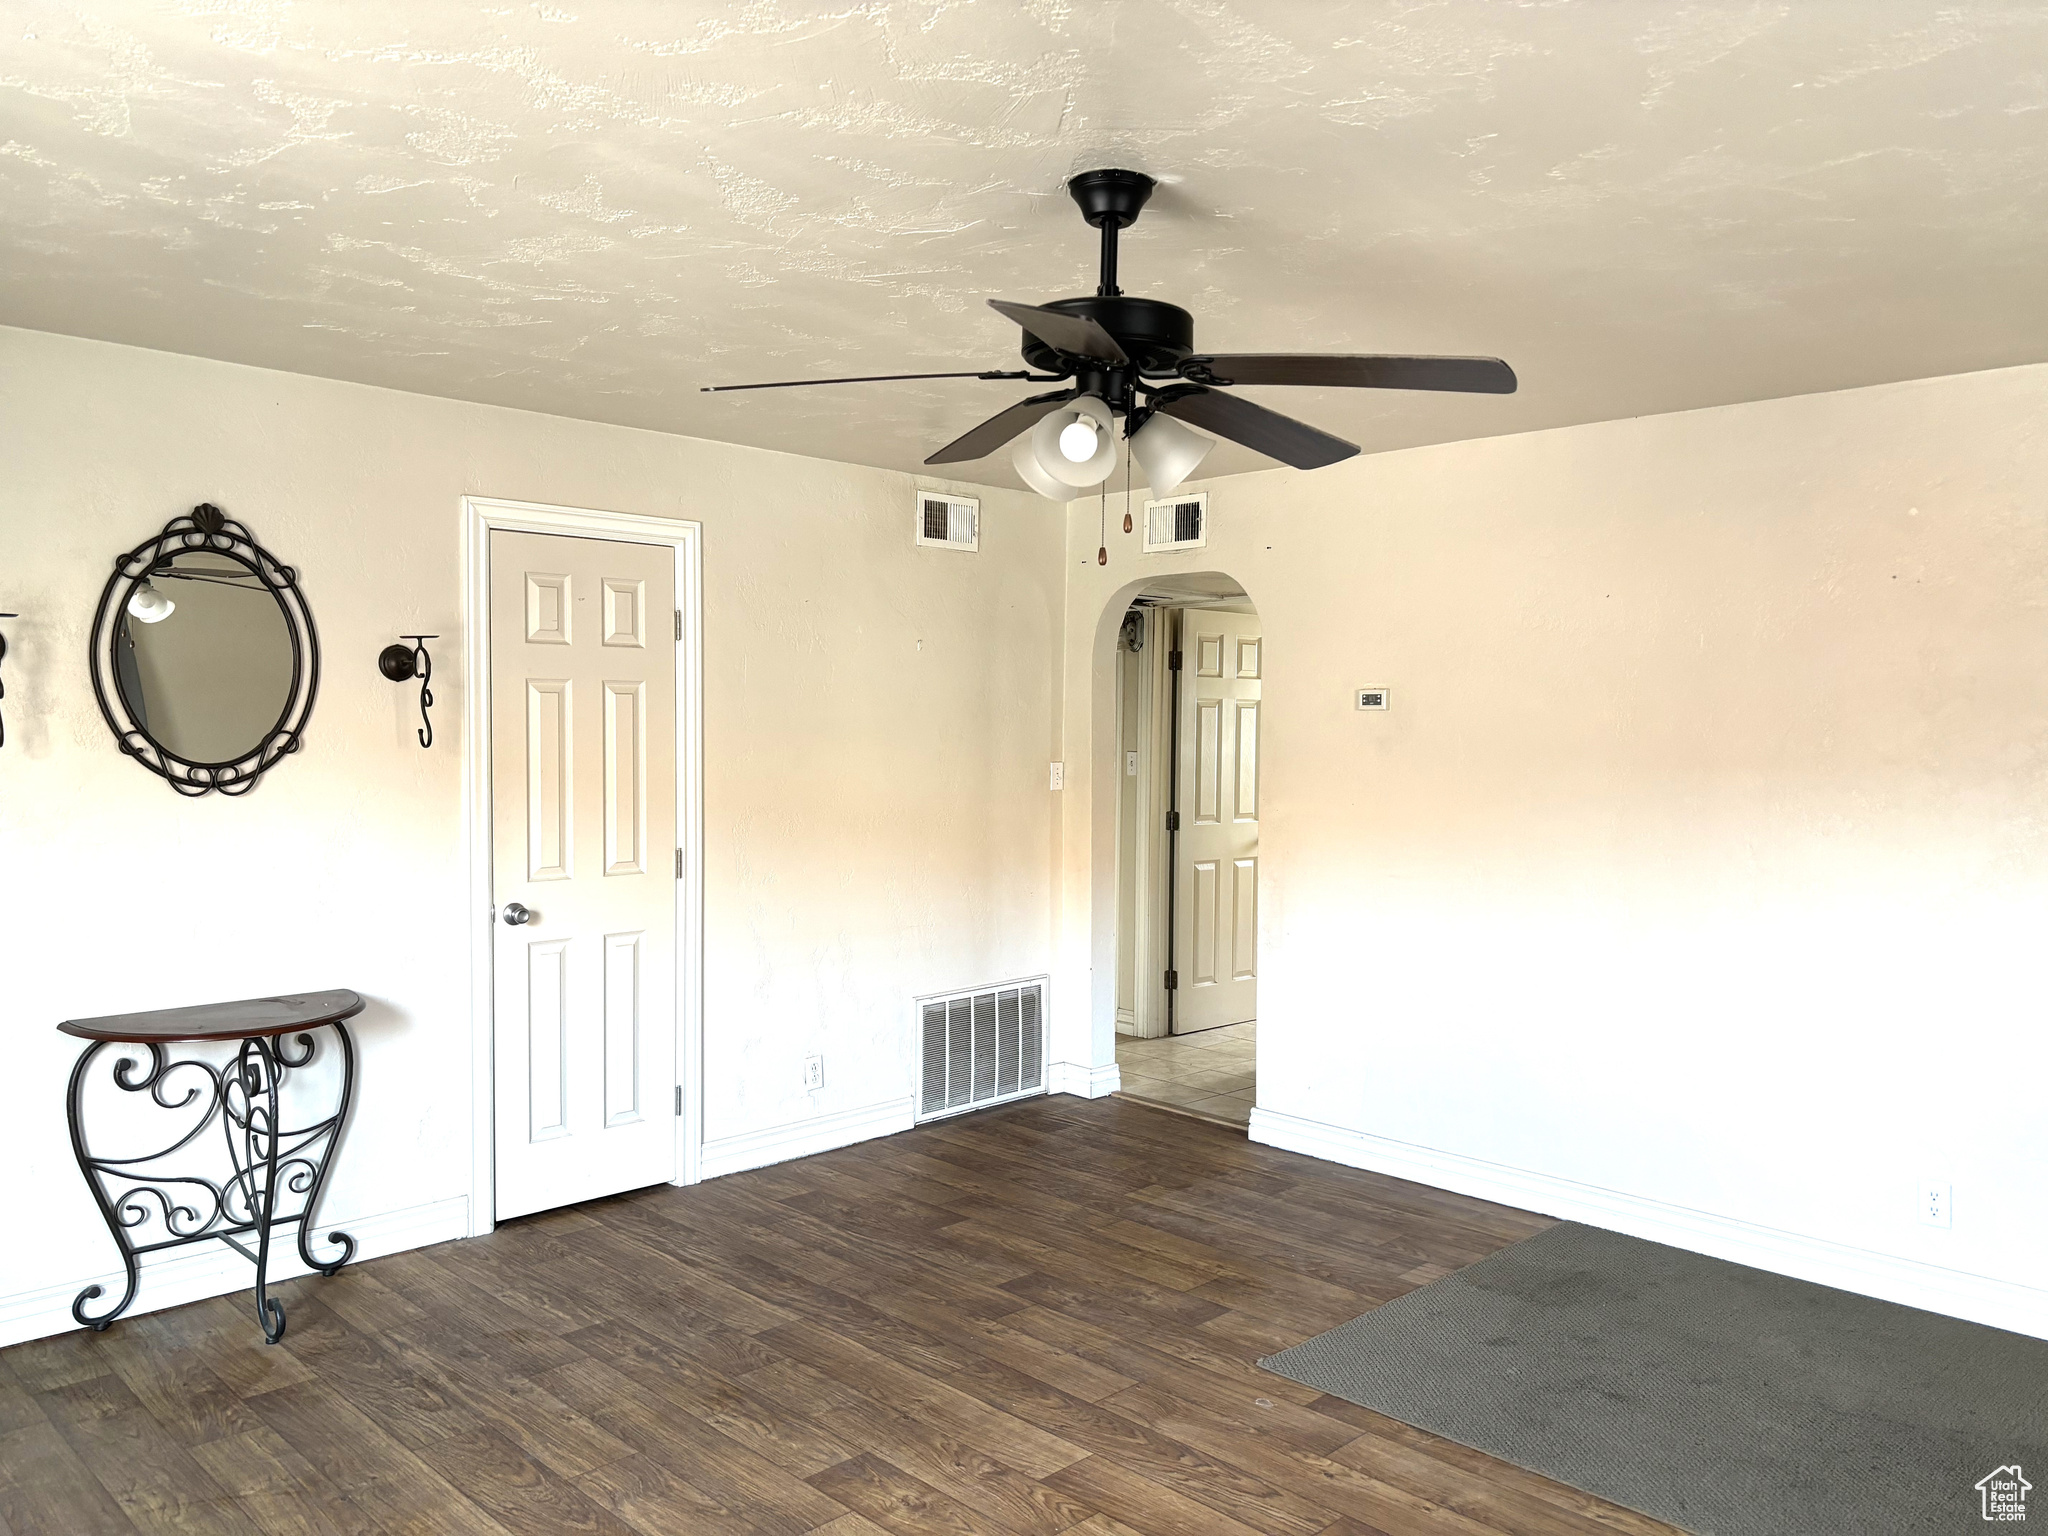 Empty room coat closet and arched entry to the rest of the home. with dark hardwood / wood-style floors and ceiling fan